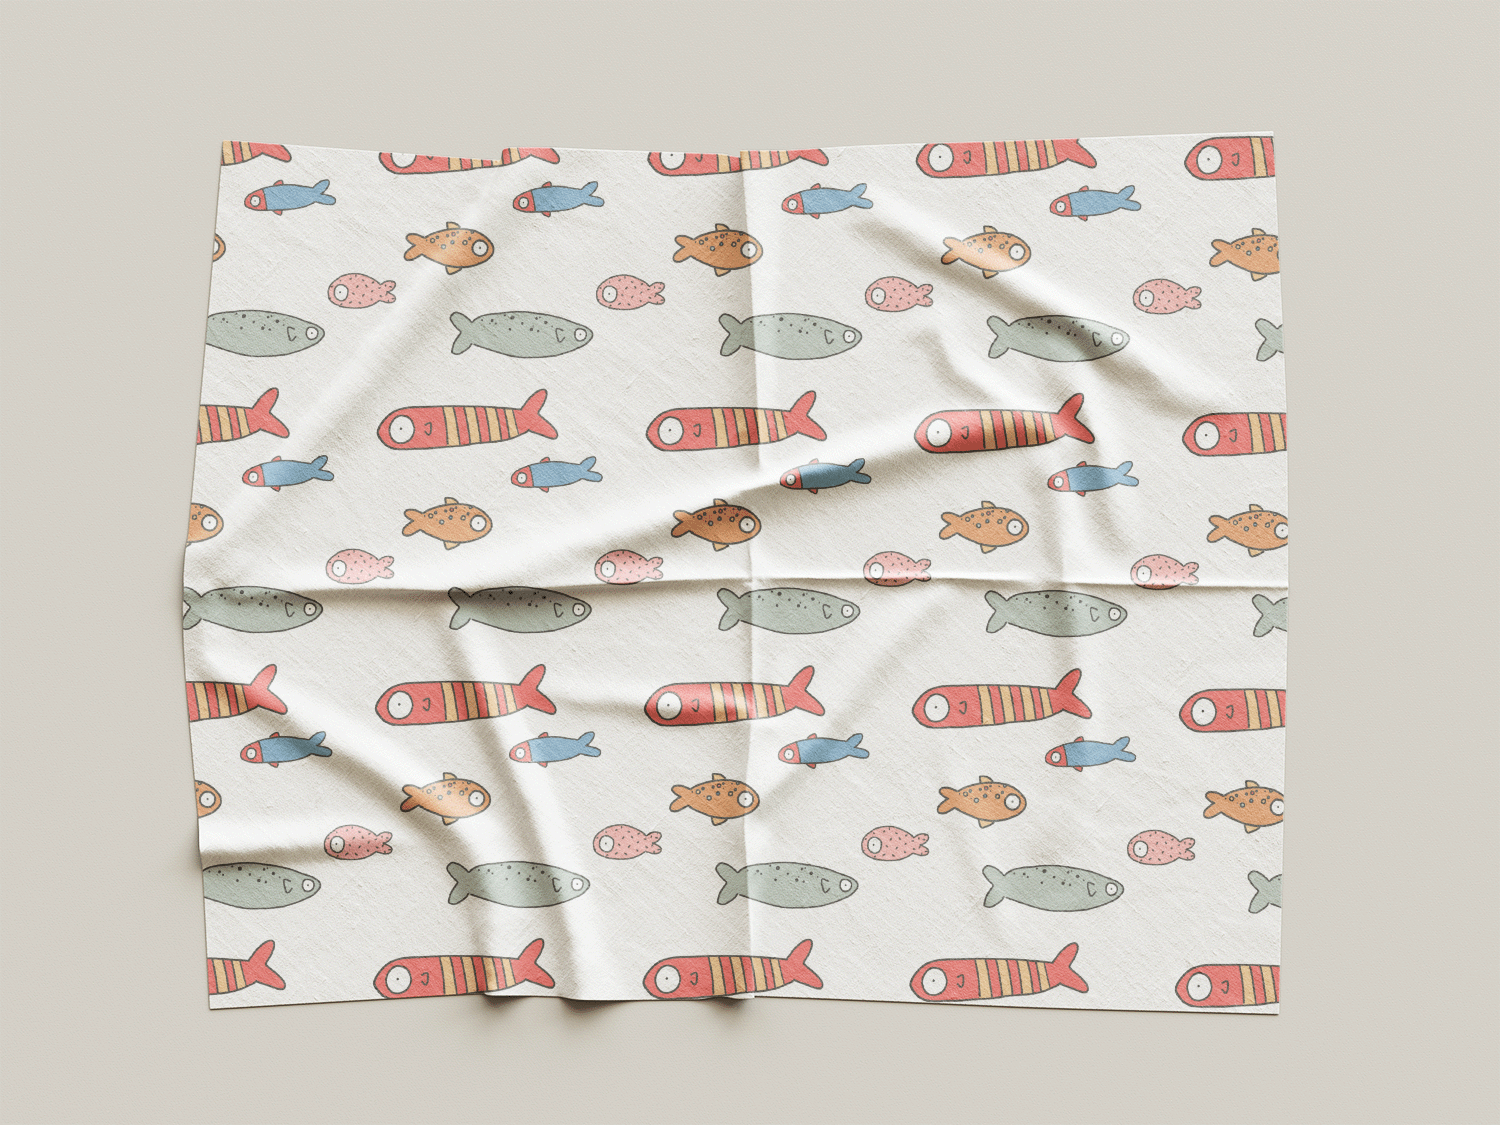 A digital fabric swatch of the Fishies illustration, created for Wooly Tops.